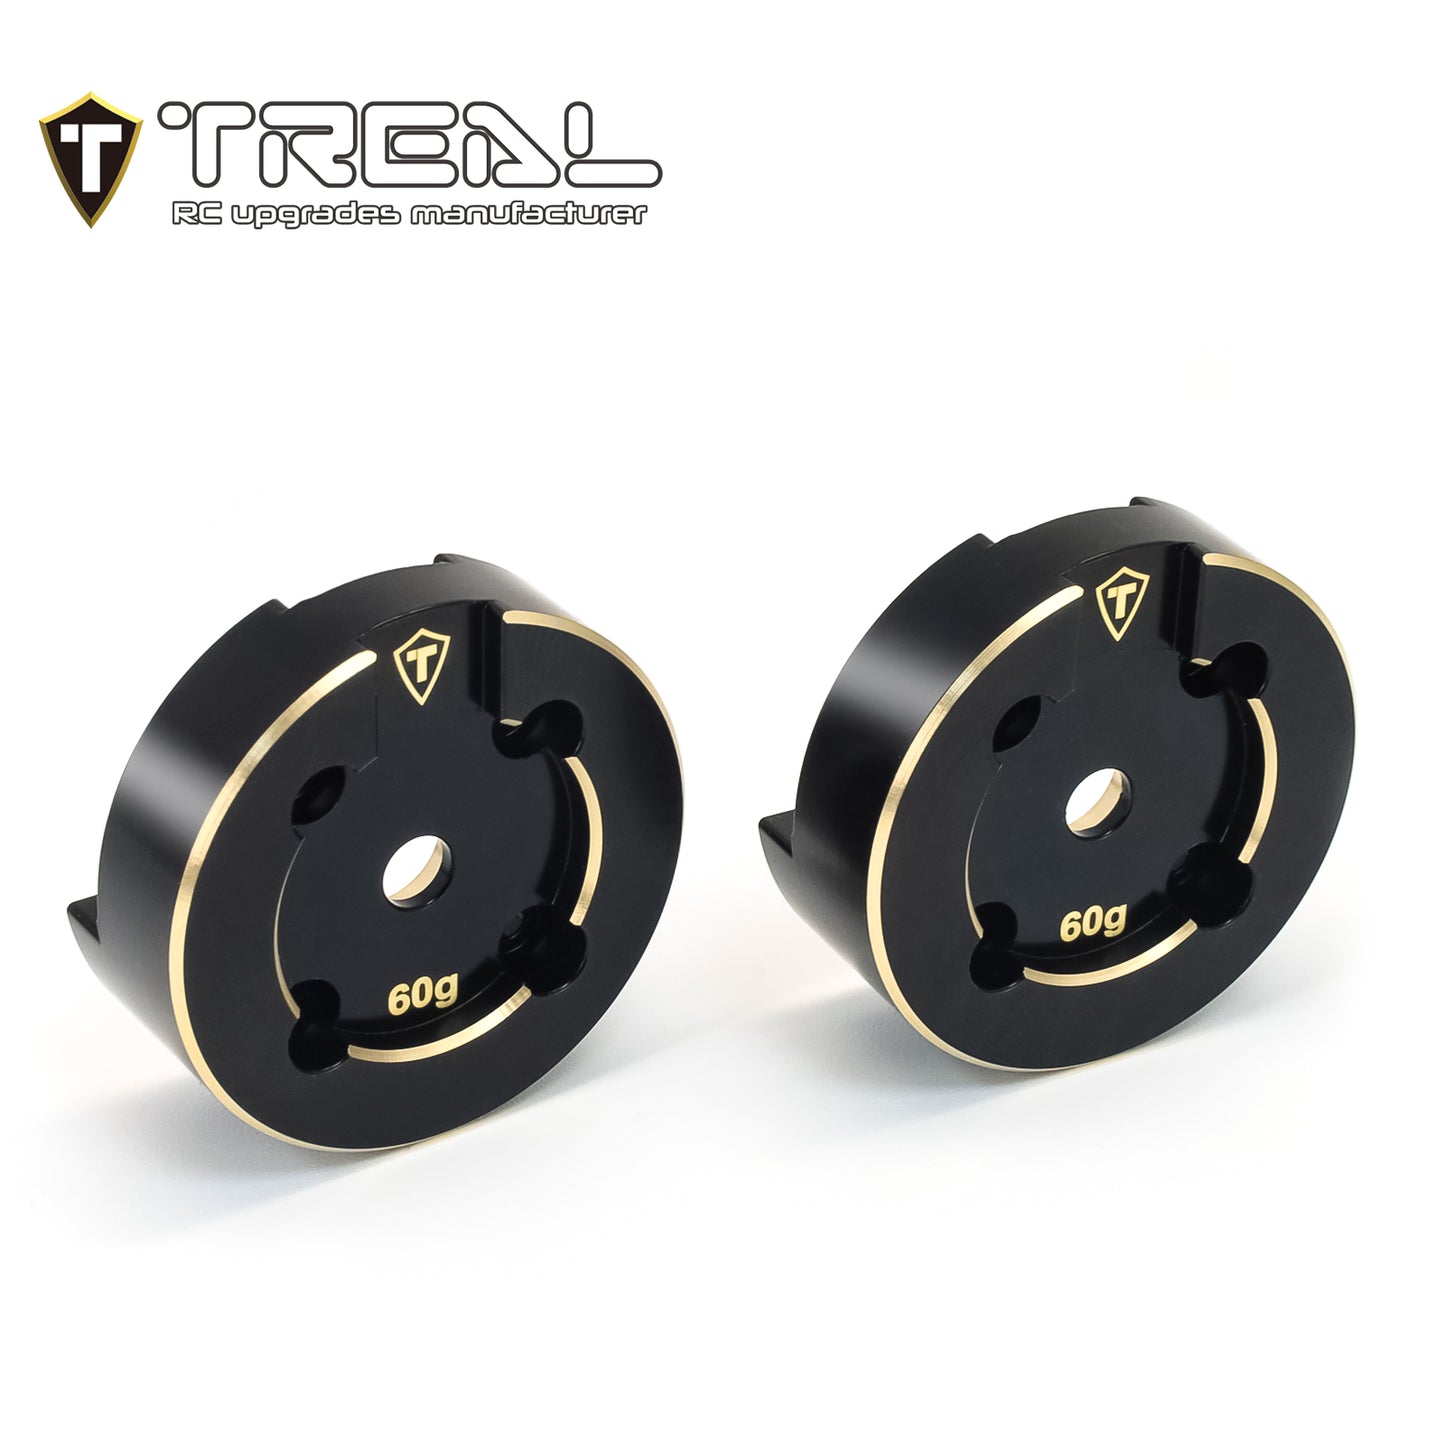 TREAL UTB18 Capra Brass Outer Portal Covers Set (2) CNC Machined Heavy Weight Upgrades-Black